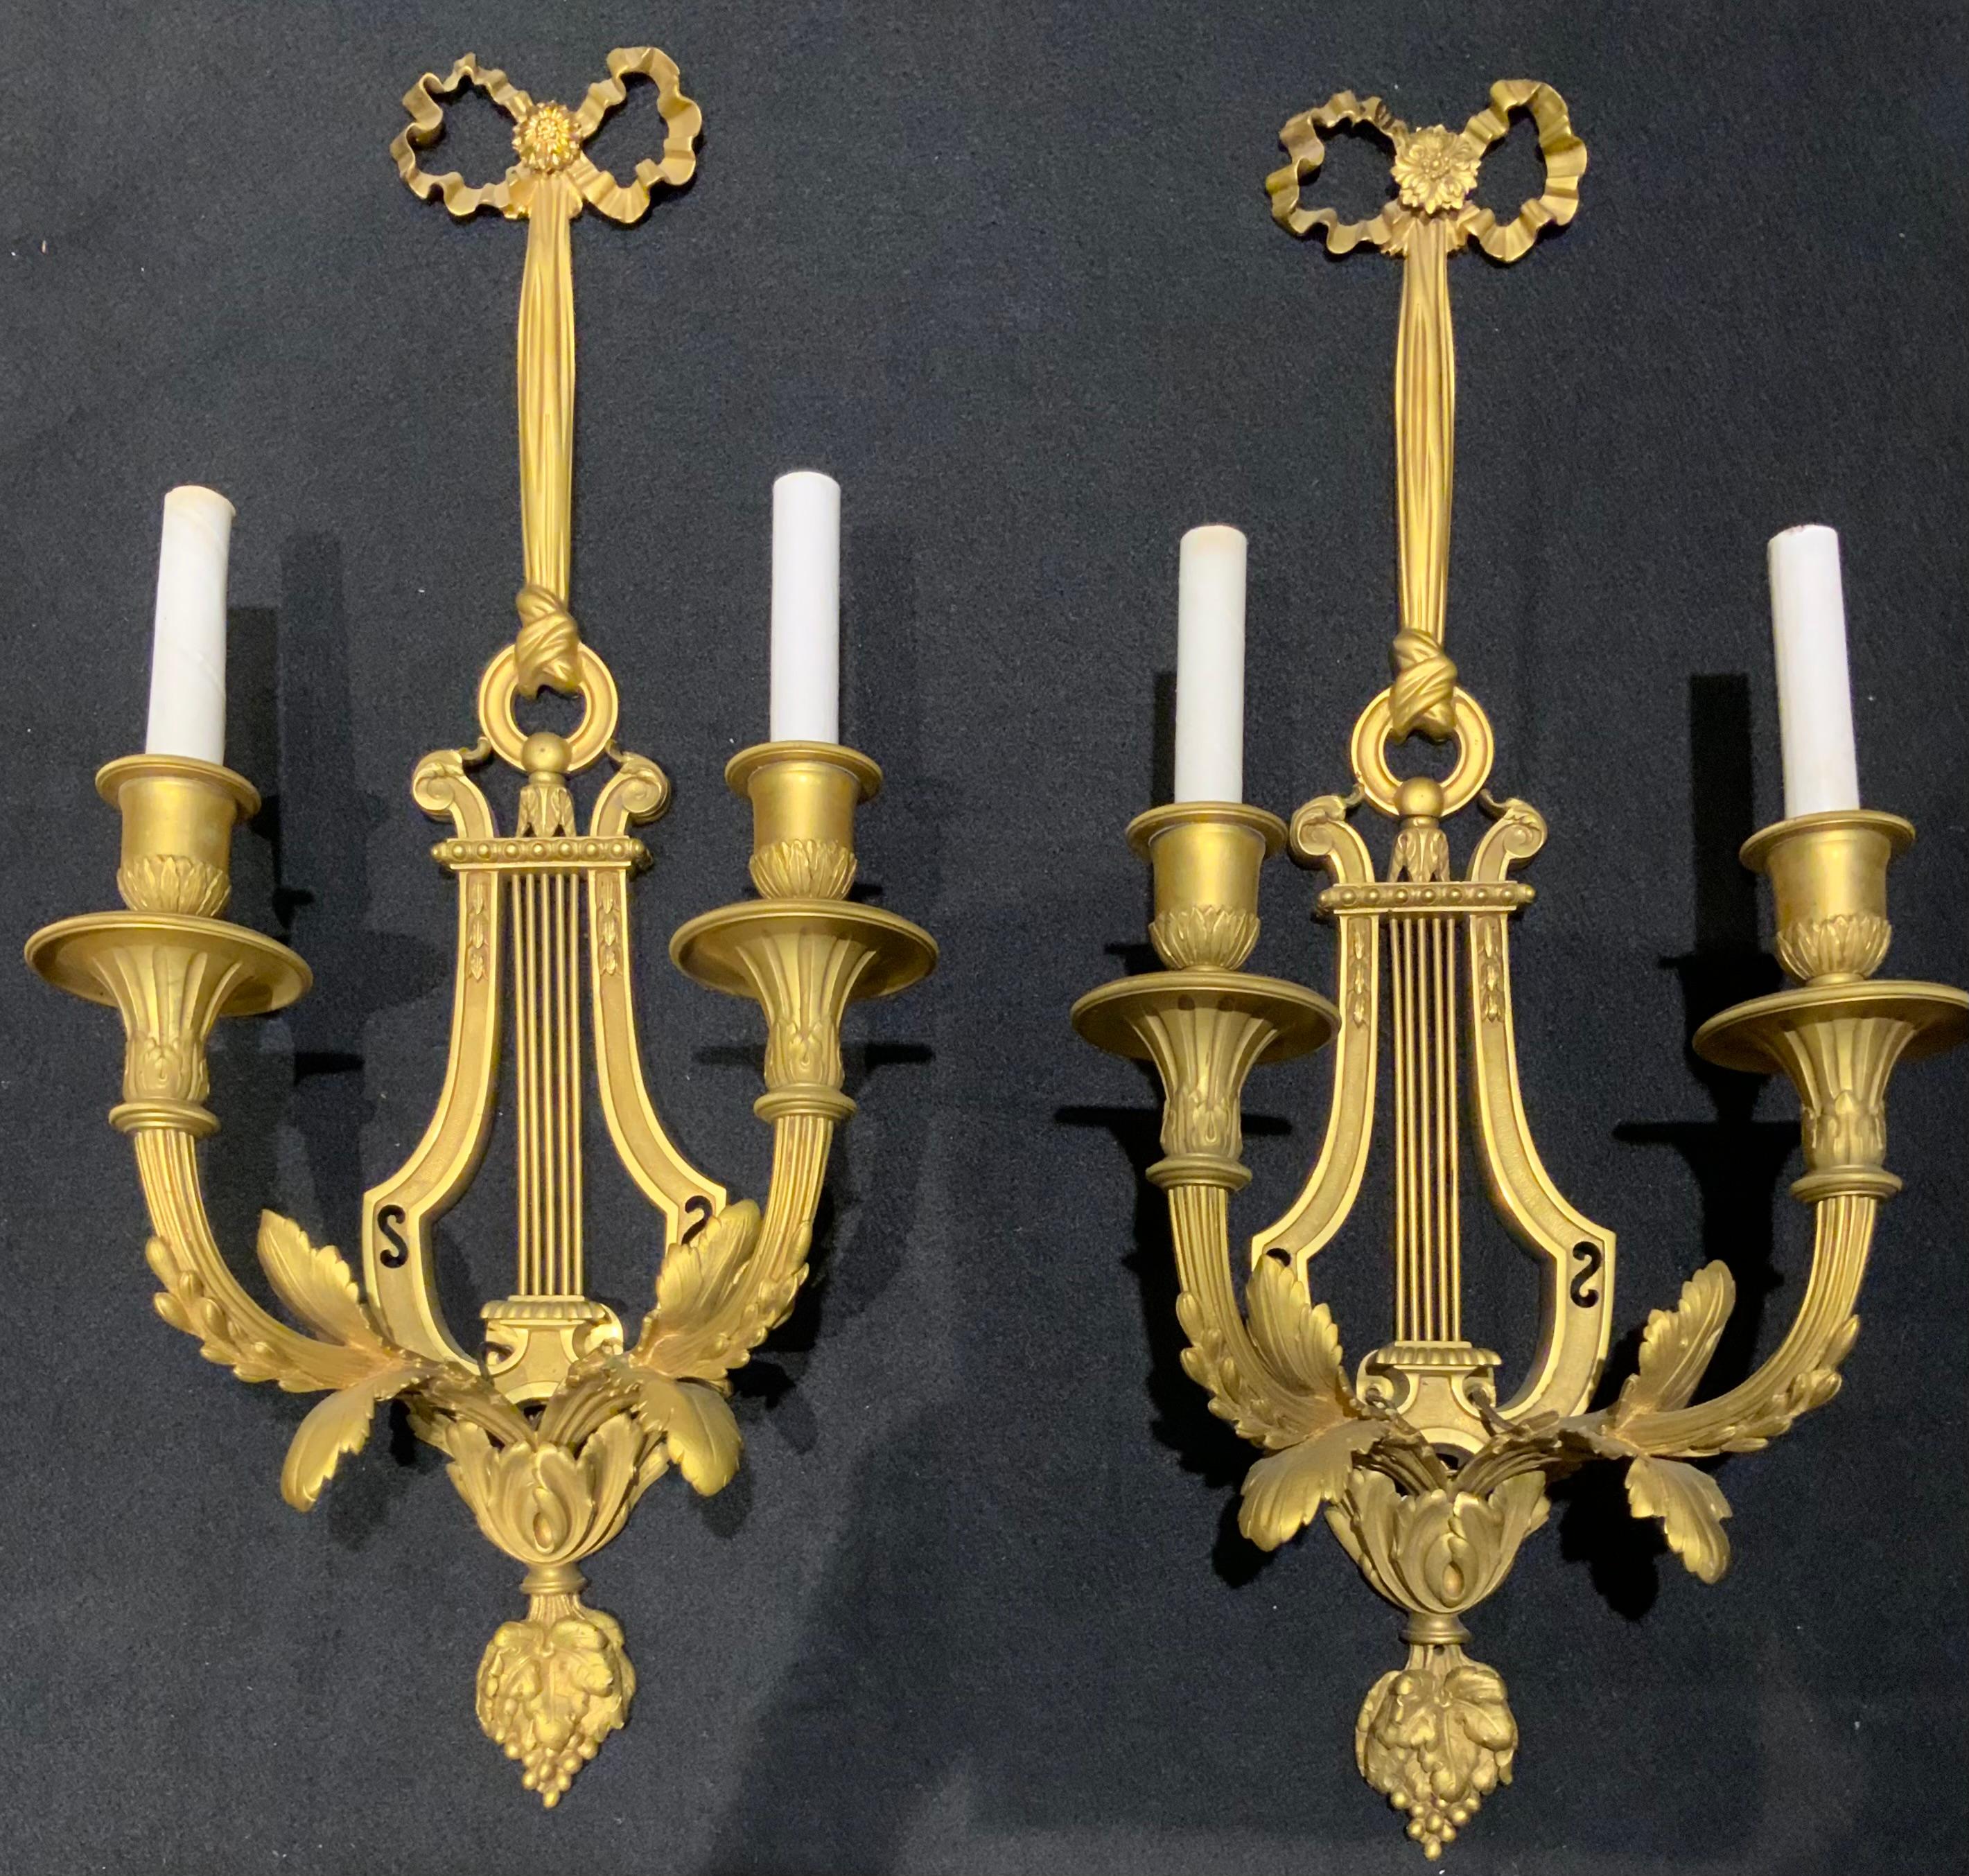 The gilding on this pair is a beautiful soft gilt gold hue,
The bronze casting is defined and sharp making this
Pair especially desirable. Each sconce has two lights
Which is already wired. The crest has a bow motif and the
Back of the sconce is in